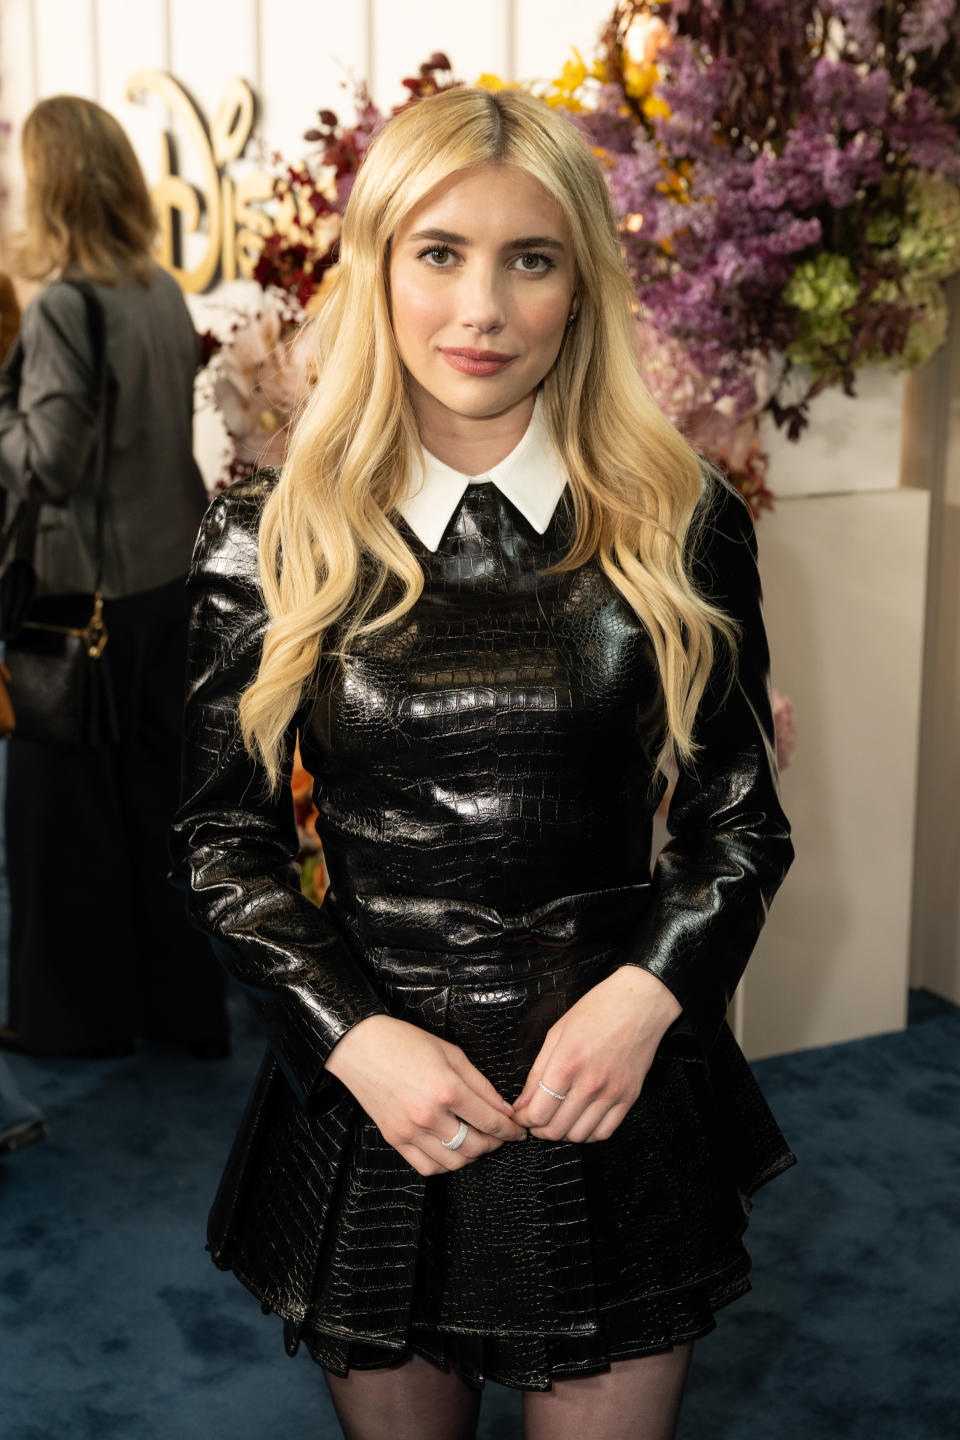 Emma Roberts wearing a black textured dress with a white collar at an event. She stands in front of a backdrop with flowers. Other attendees are in the background